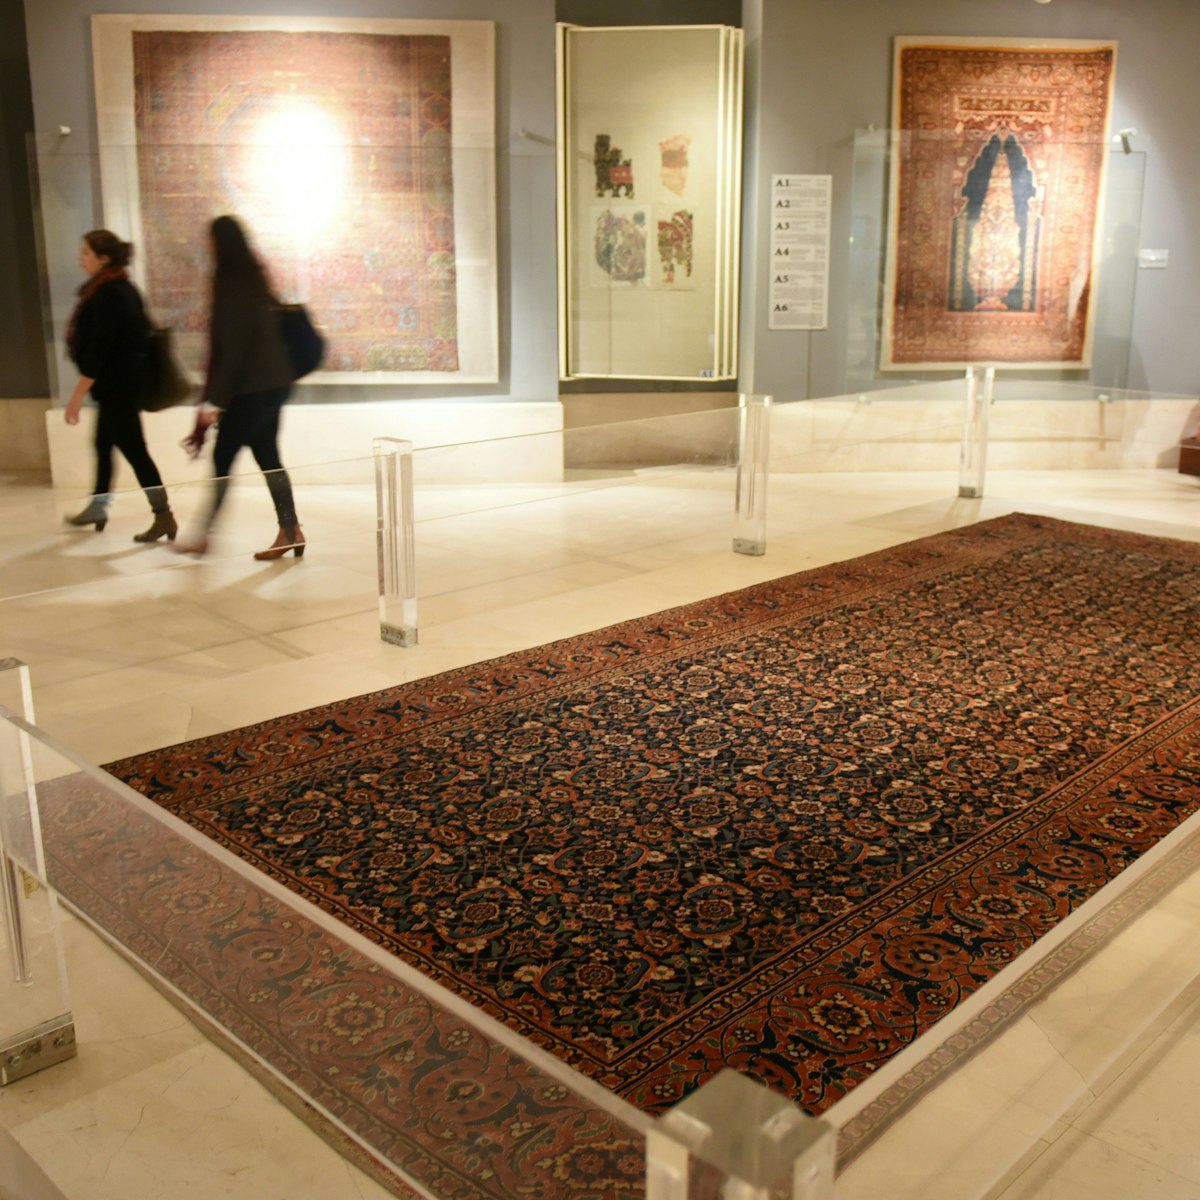 People visit Cairo's Museum of Islamic Art after it reopened to the public on January 19, 2017, in the egyptian capital..The Egyptian president reopened the museum on January 18, three years after a car bombing partially destroyed the building. / AFP / MOHAMED EL-SHAHED        (Photo credit should read MOHAMED EL-SHAHED/AFP/Getty Images)